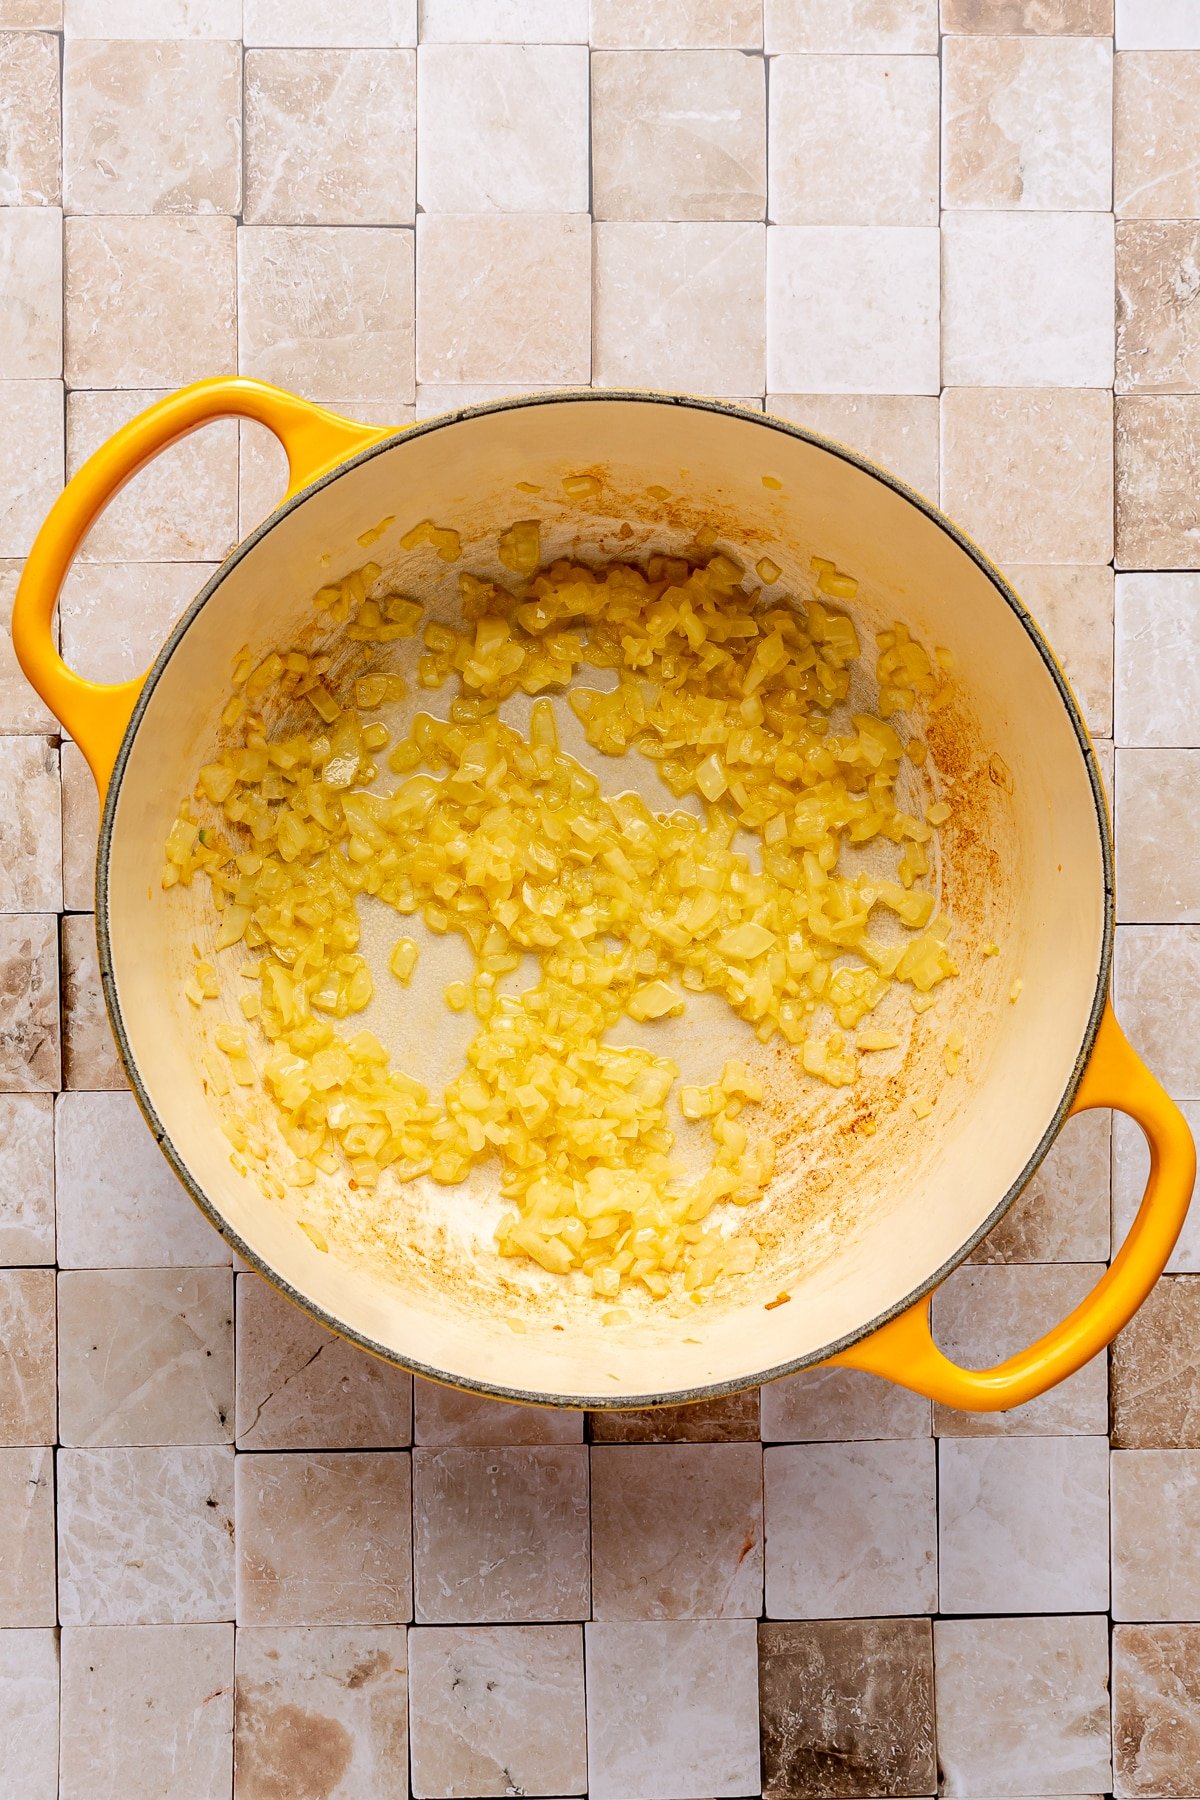 Diced onion and several other ingredients sit in the bottom of a pot with yellow handles.